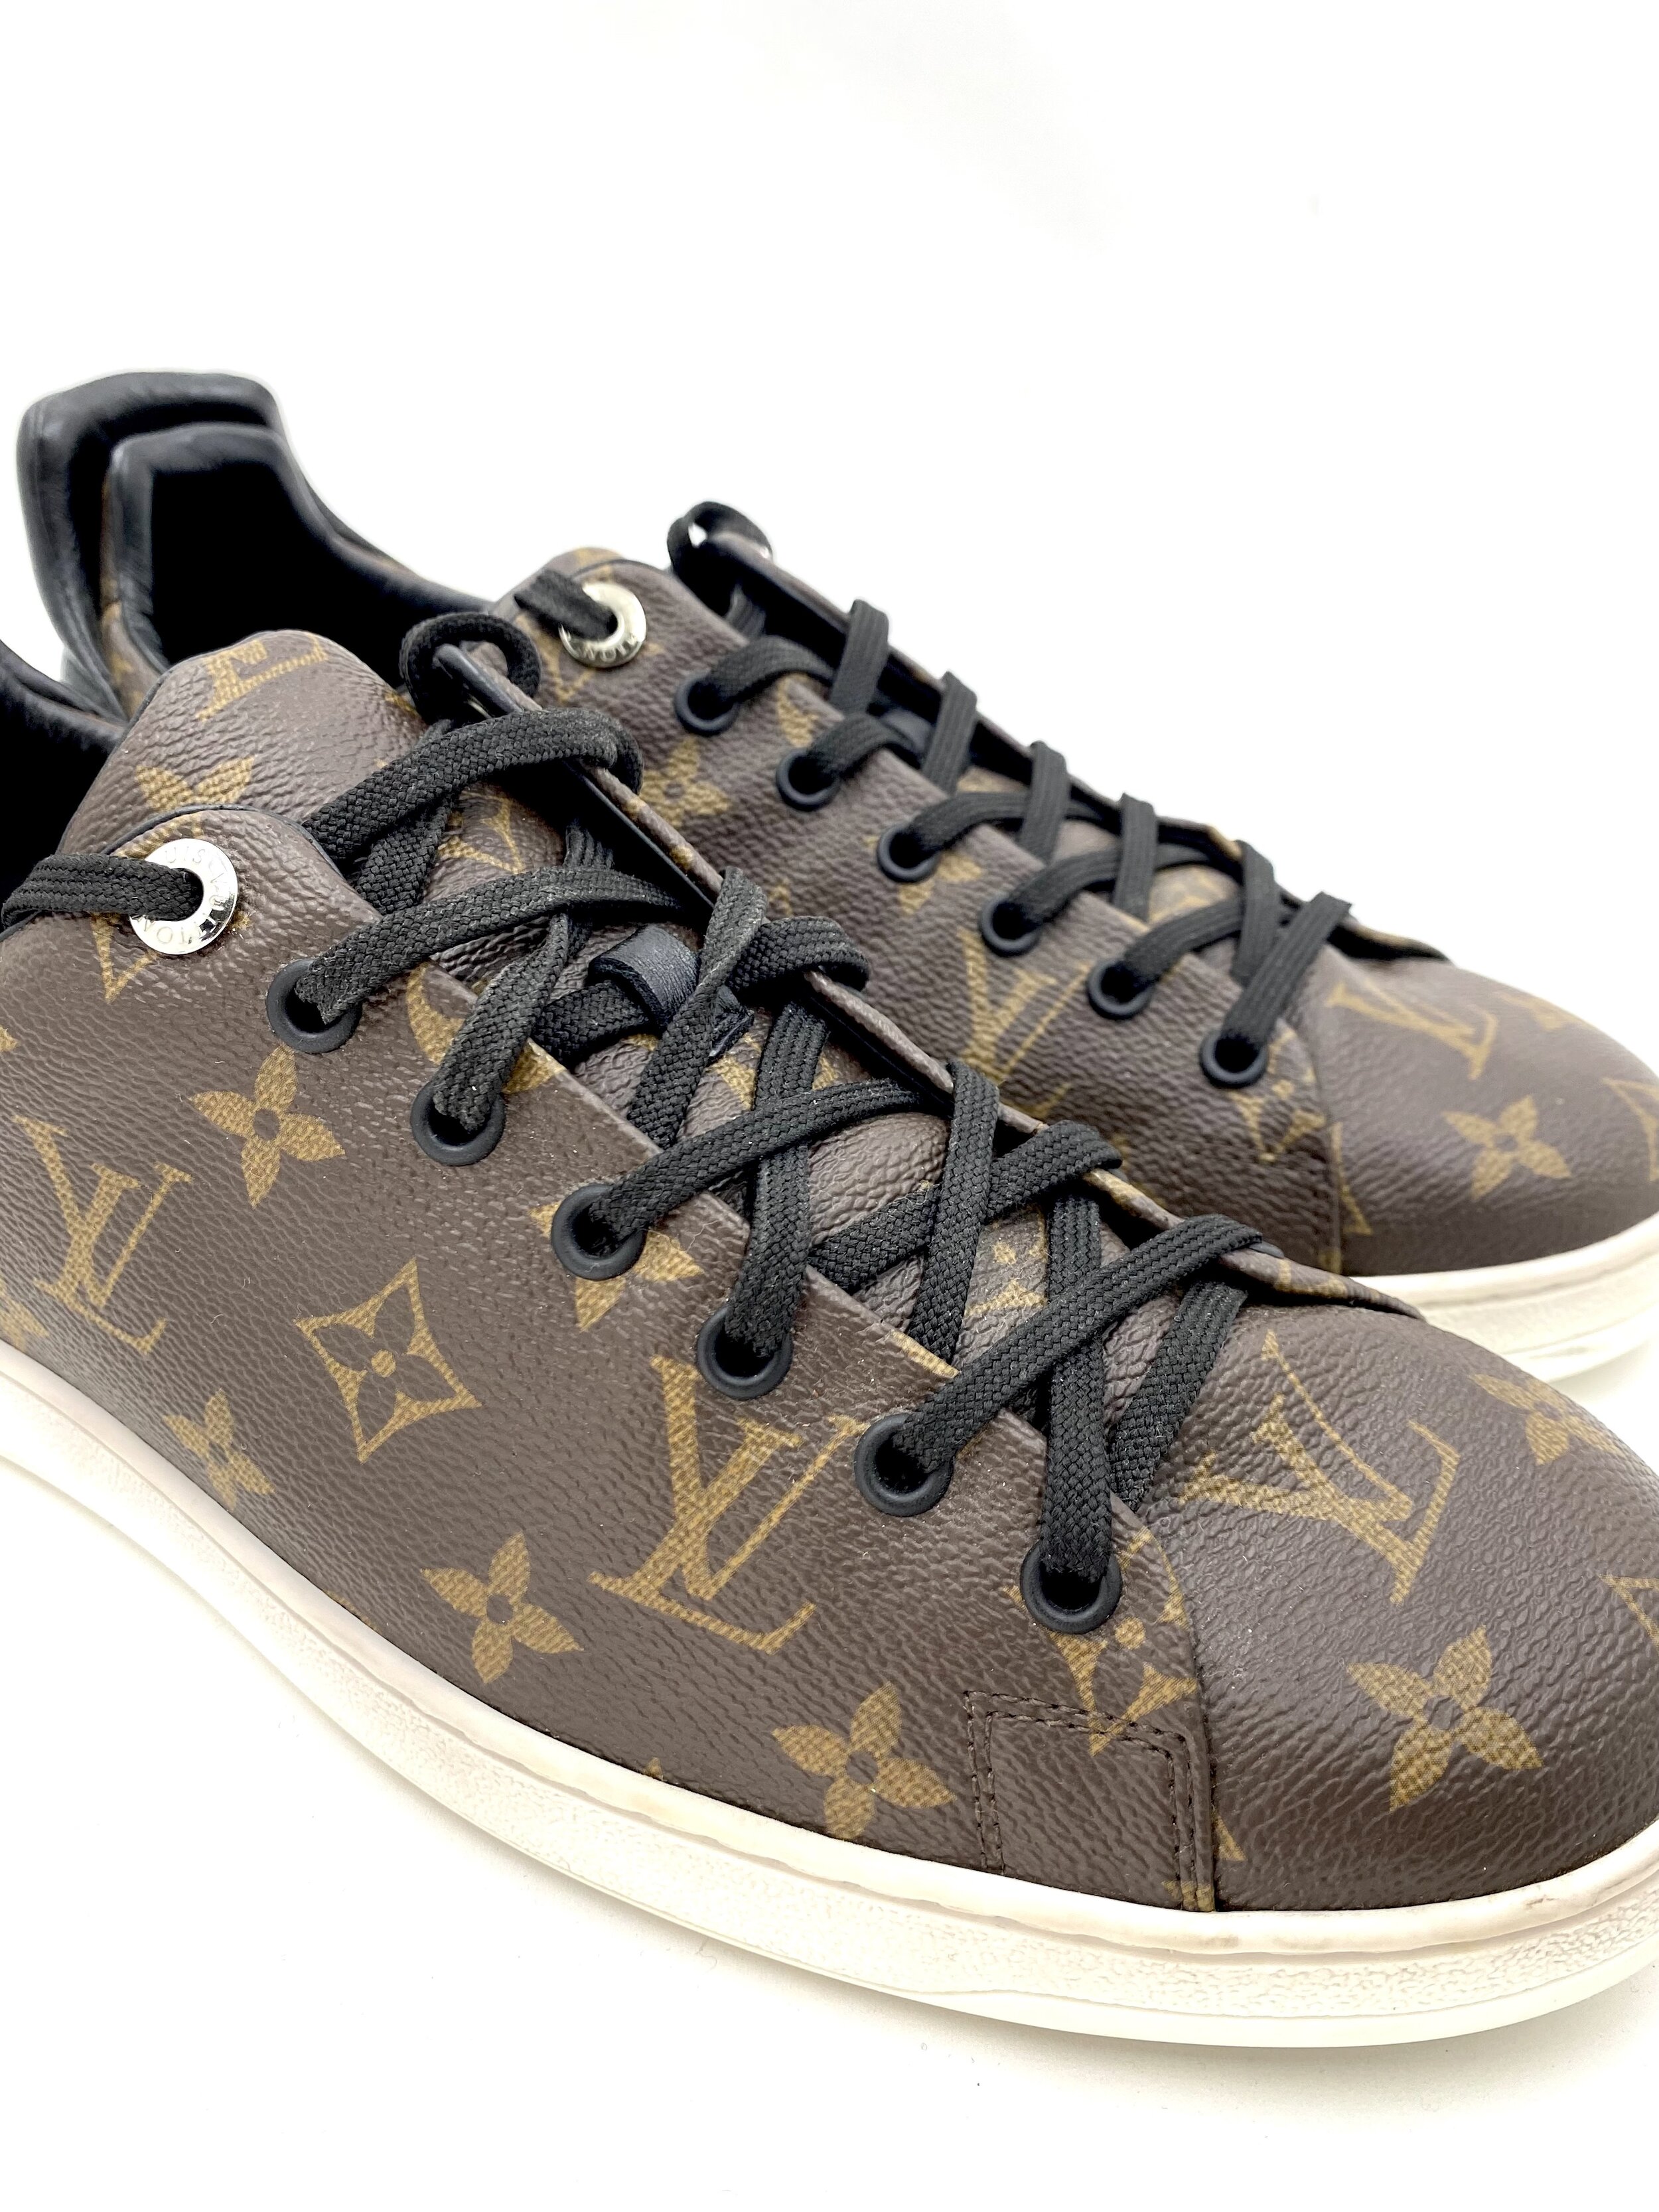 Louis Vuitton Monogram Coated Canvas Frontrow Sneakers